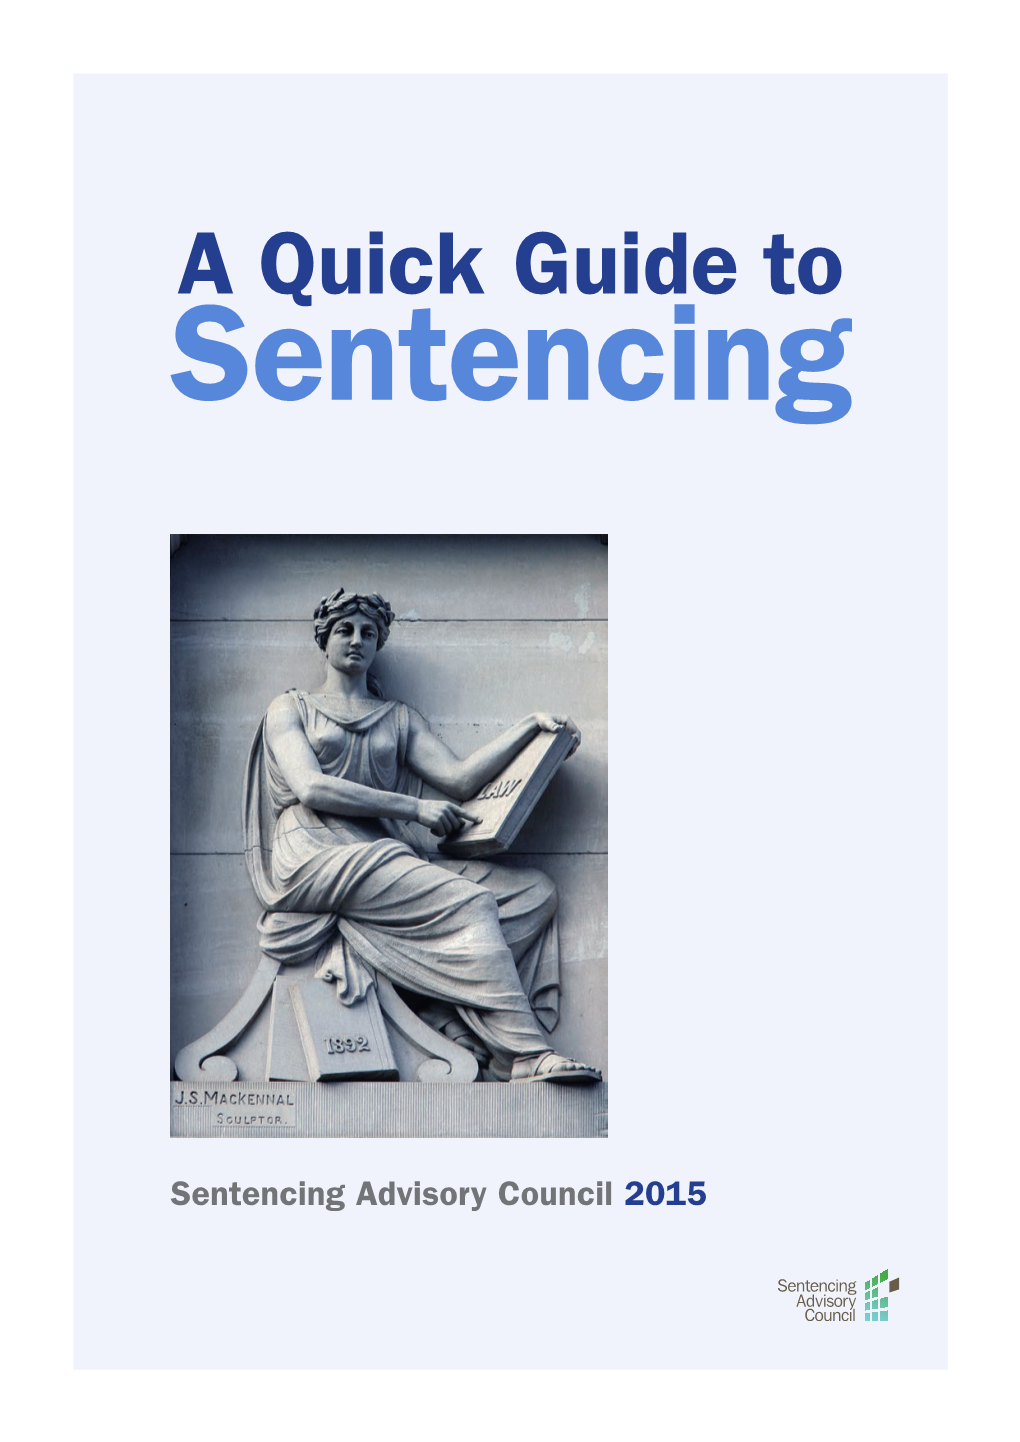 A Quick Guide to Sentencing